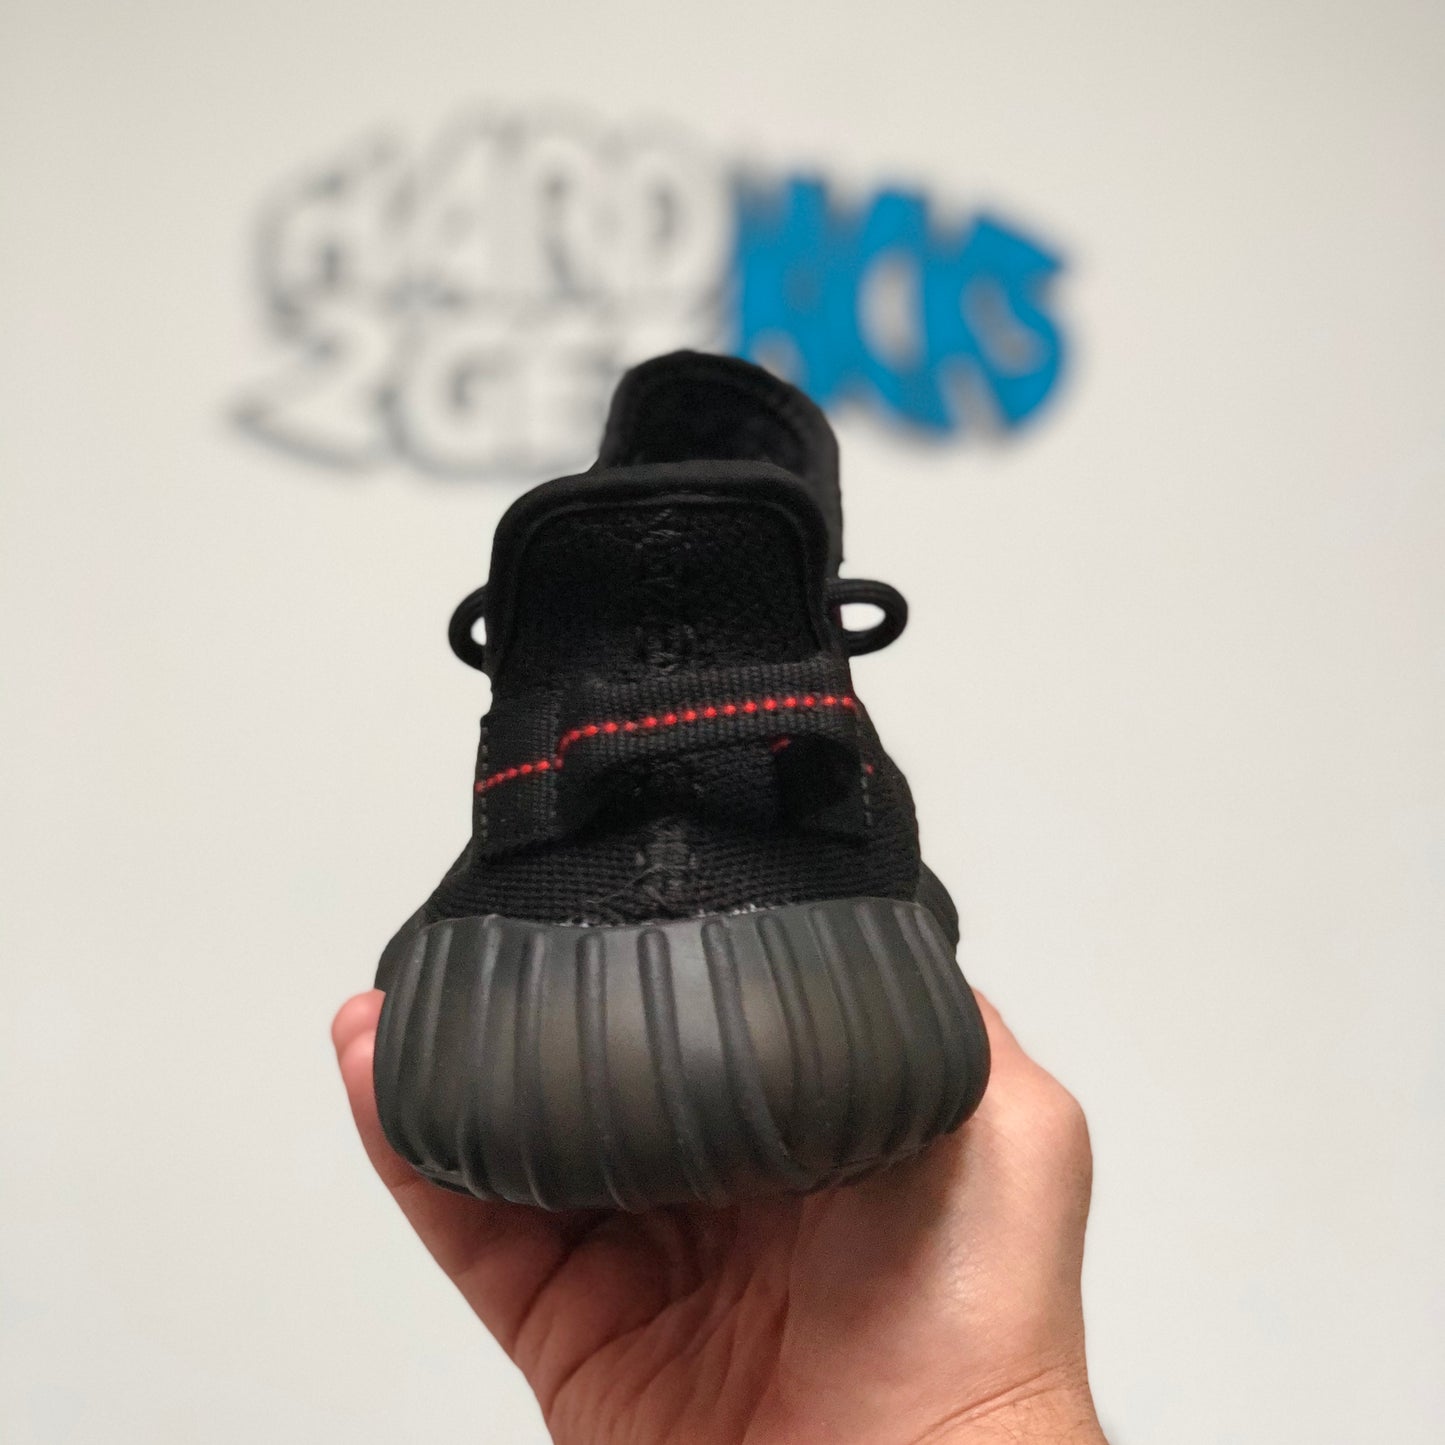 Yeezy Boost 350 V2 - Bred (2020 Re-release)